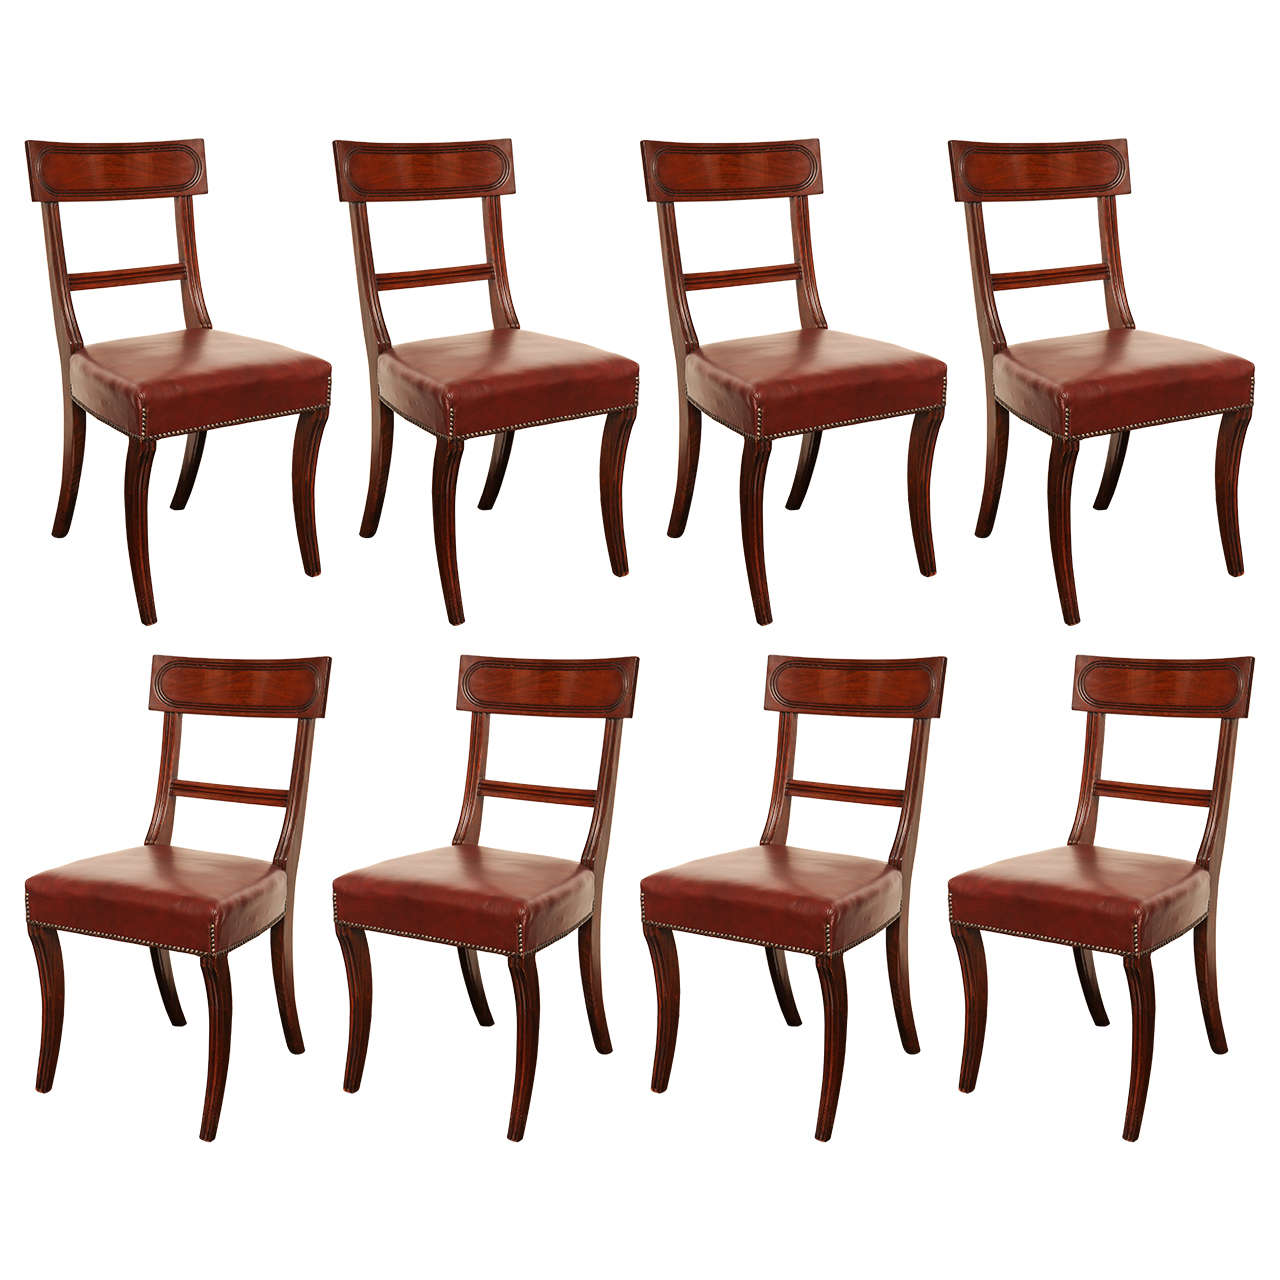 Set of Eight 19th Century English Neoclassical Dining Chairs